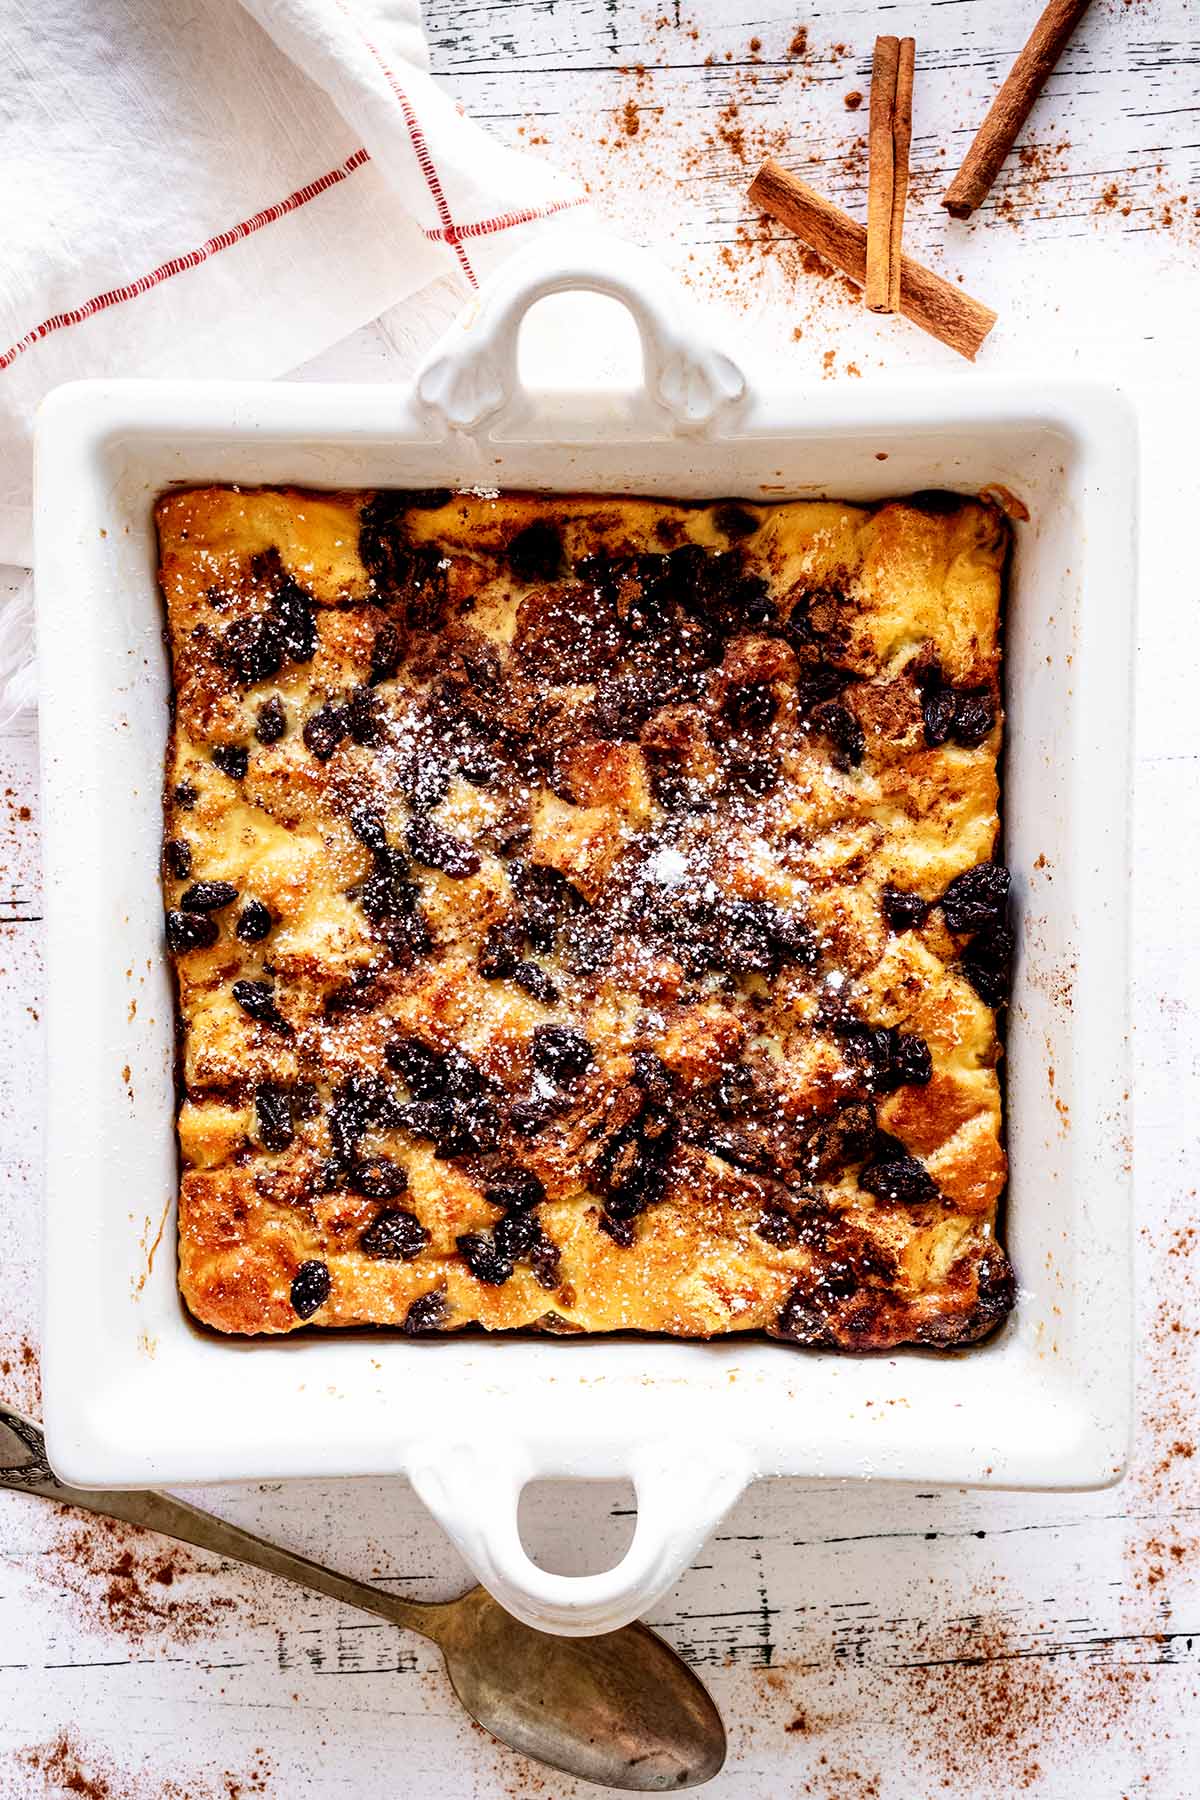 Overhead view of raisin bread pudding in a white baking dish with powdered sugar sprinkled over the top